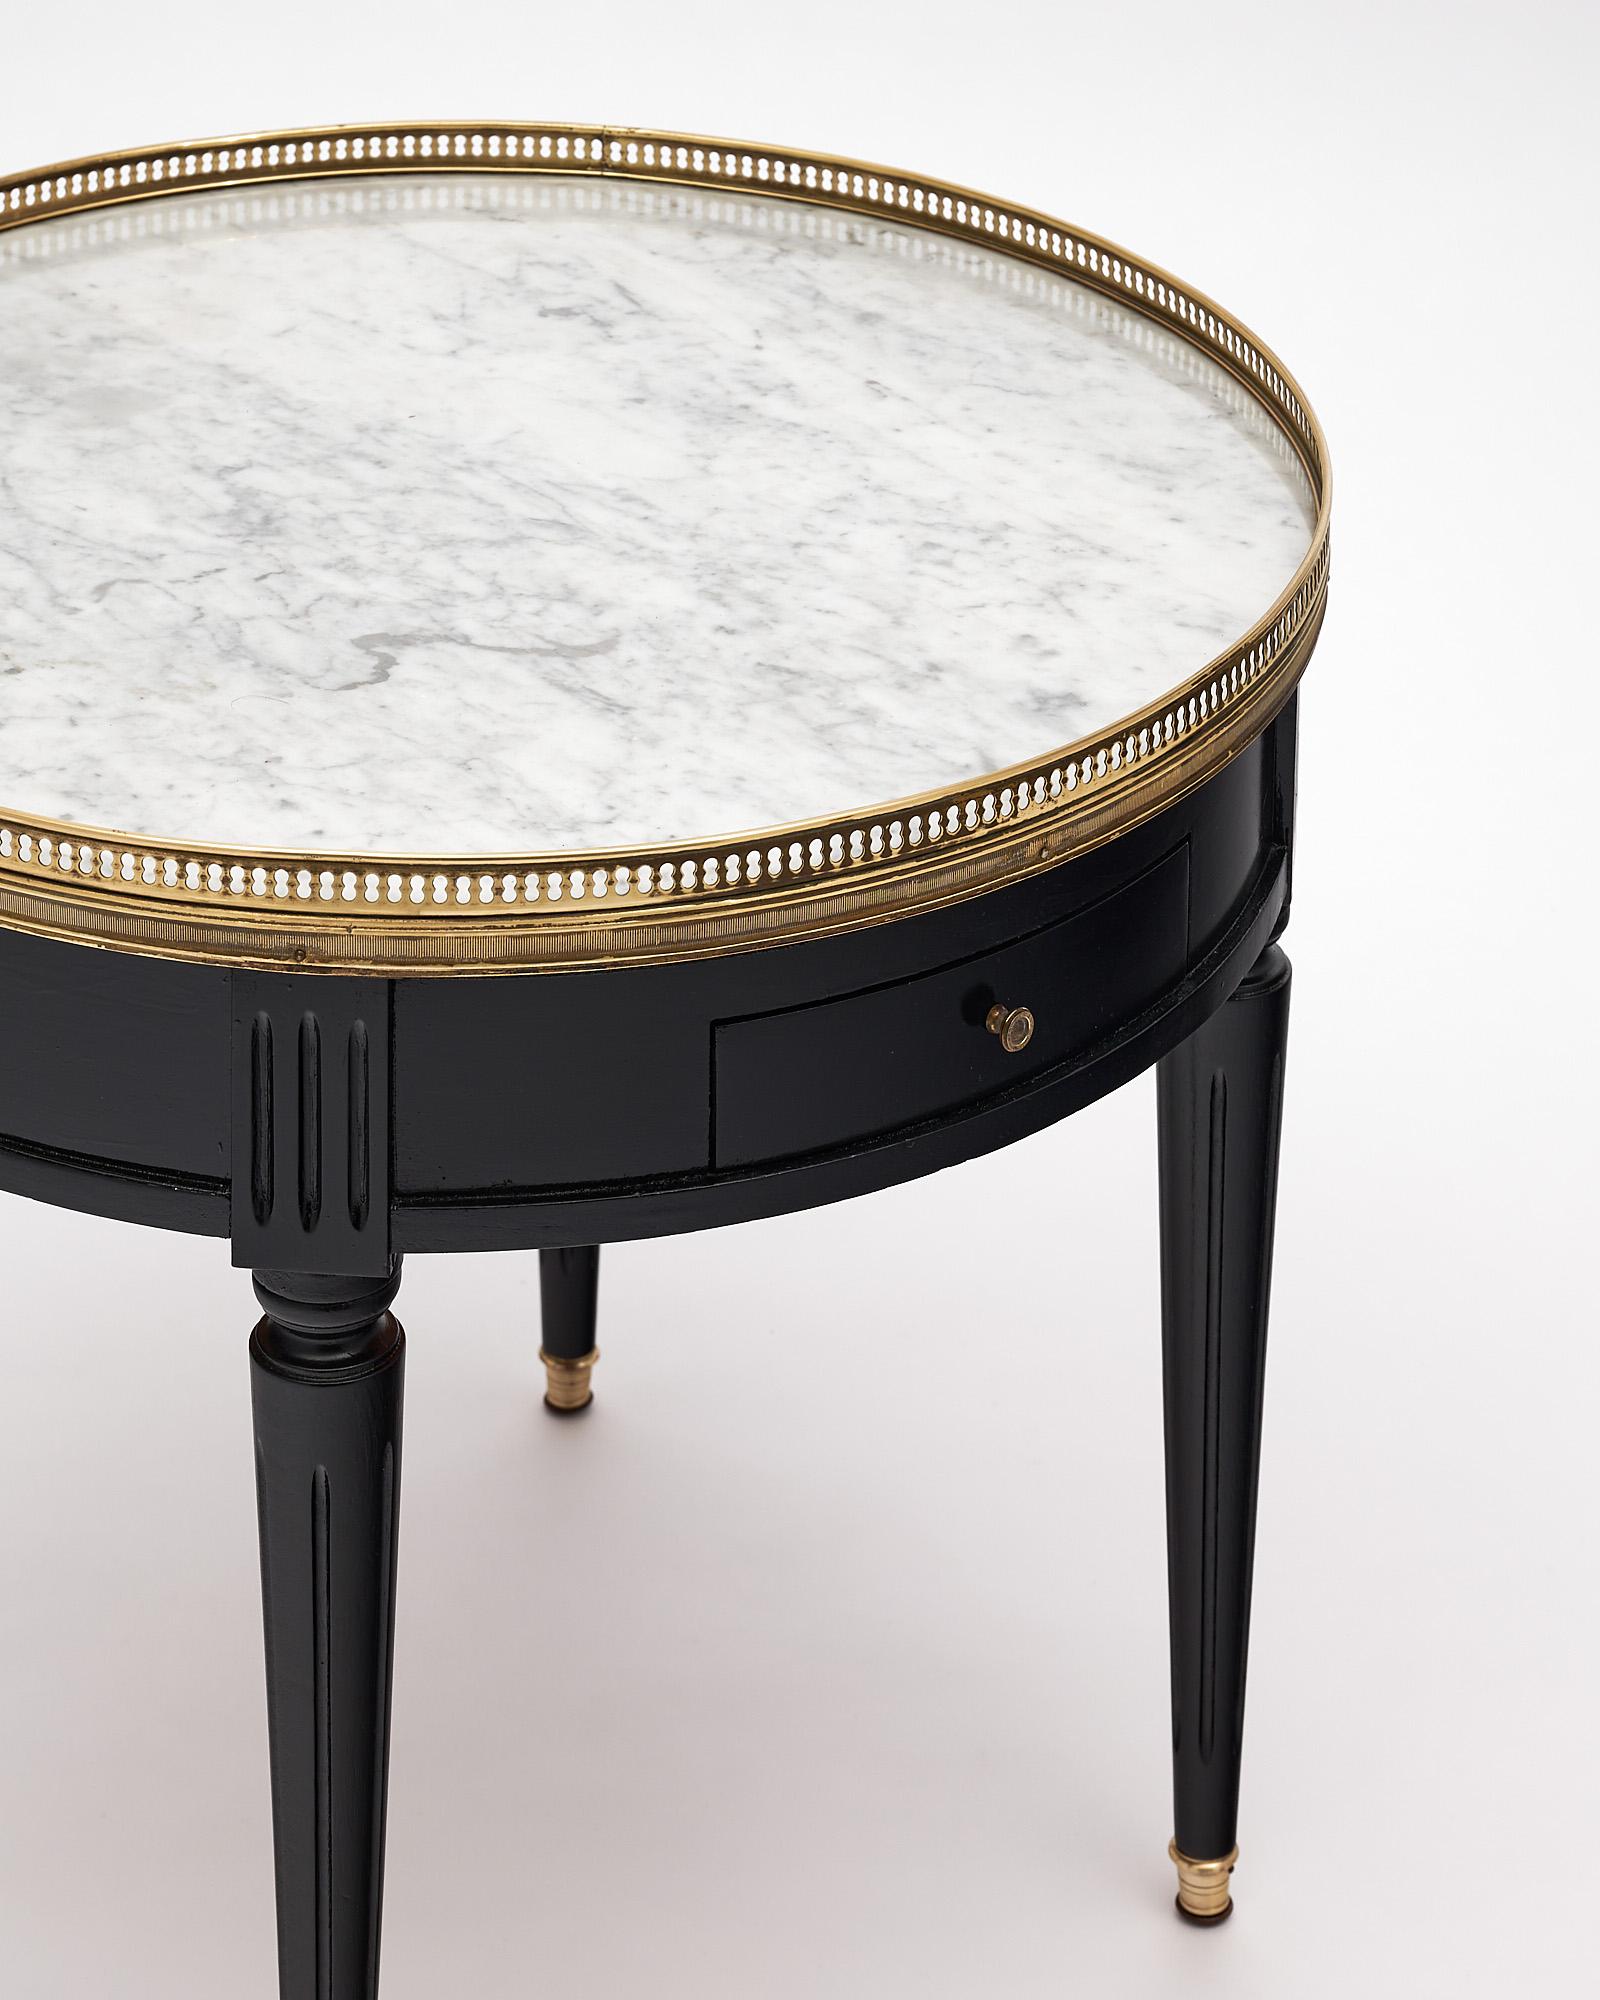 Side table, “bouillotte” Louis XVI style, made of ebonized Mahogany. White Carrara intact marble top is surrounded with an opened gilt brass gallery, the table features 2 pull out leaves covered with leather and two dovetailed drawers with brass